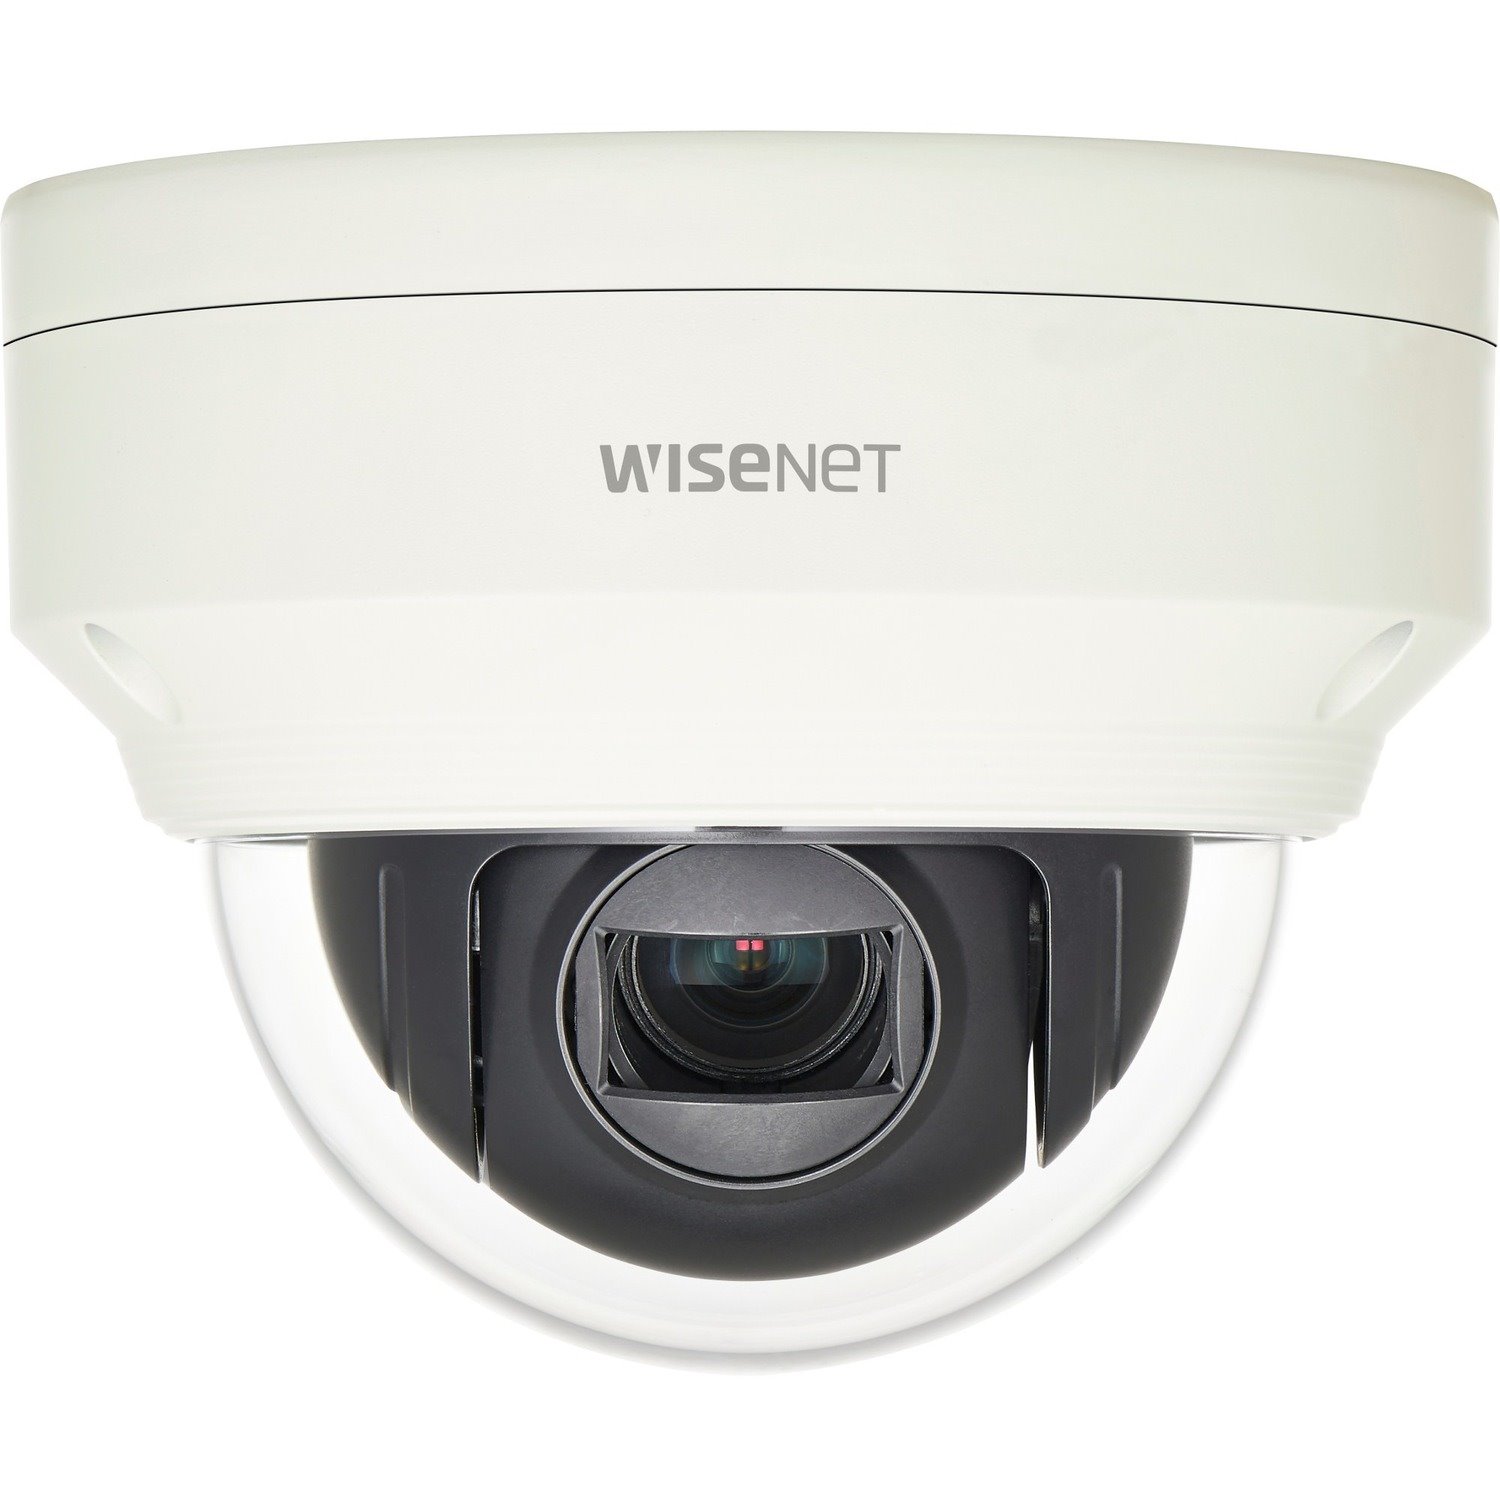 Wisenet XNP-6040H 2 Megapixel Outdoor Full HD Network Camera - Color - Dome - Ivory